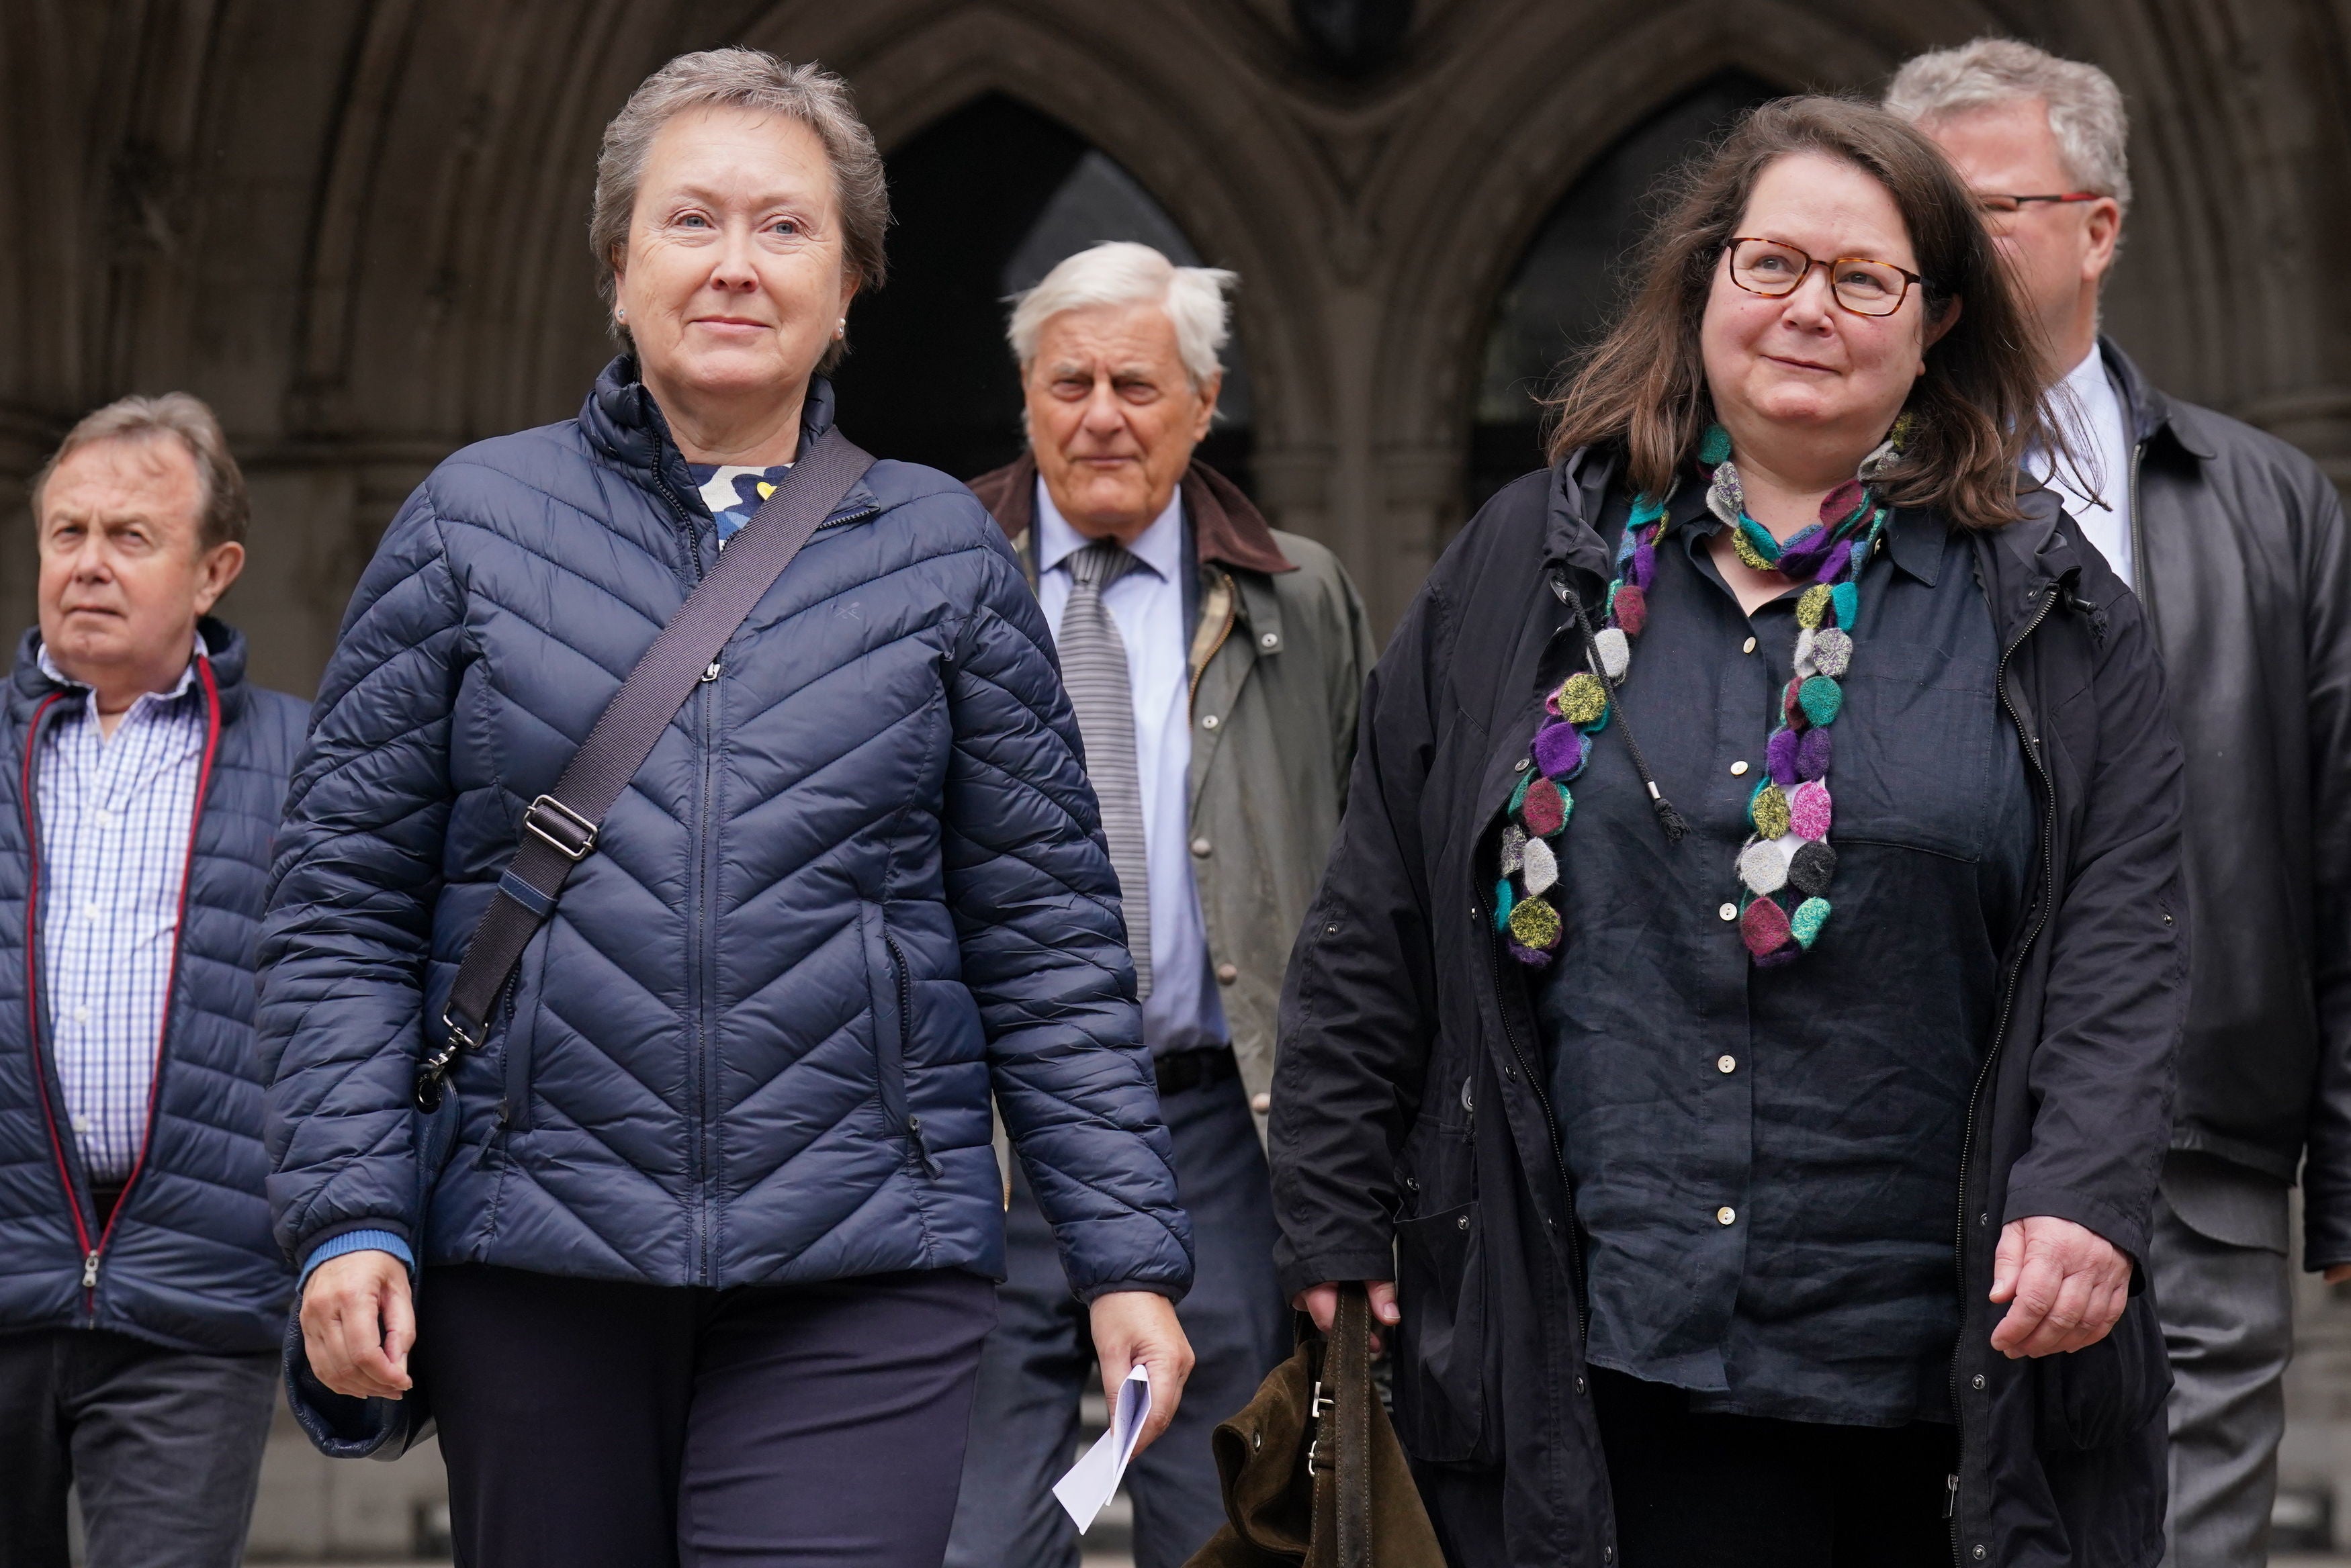 Cathy Gardner (second left) and Fay Harris (second right), whose fathers died from Covid-19, brought the case to the Royal Courts of Justice